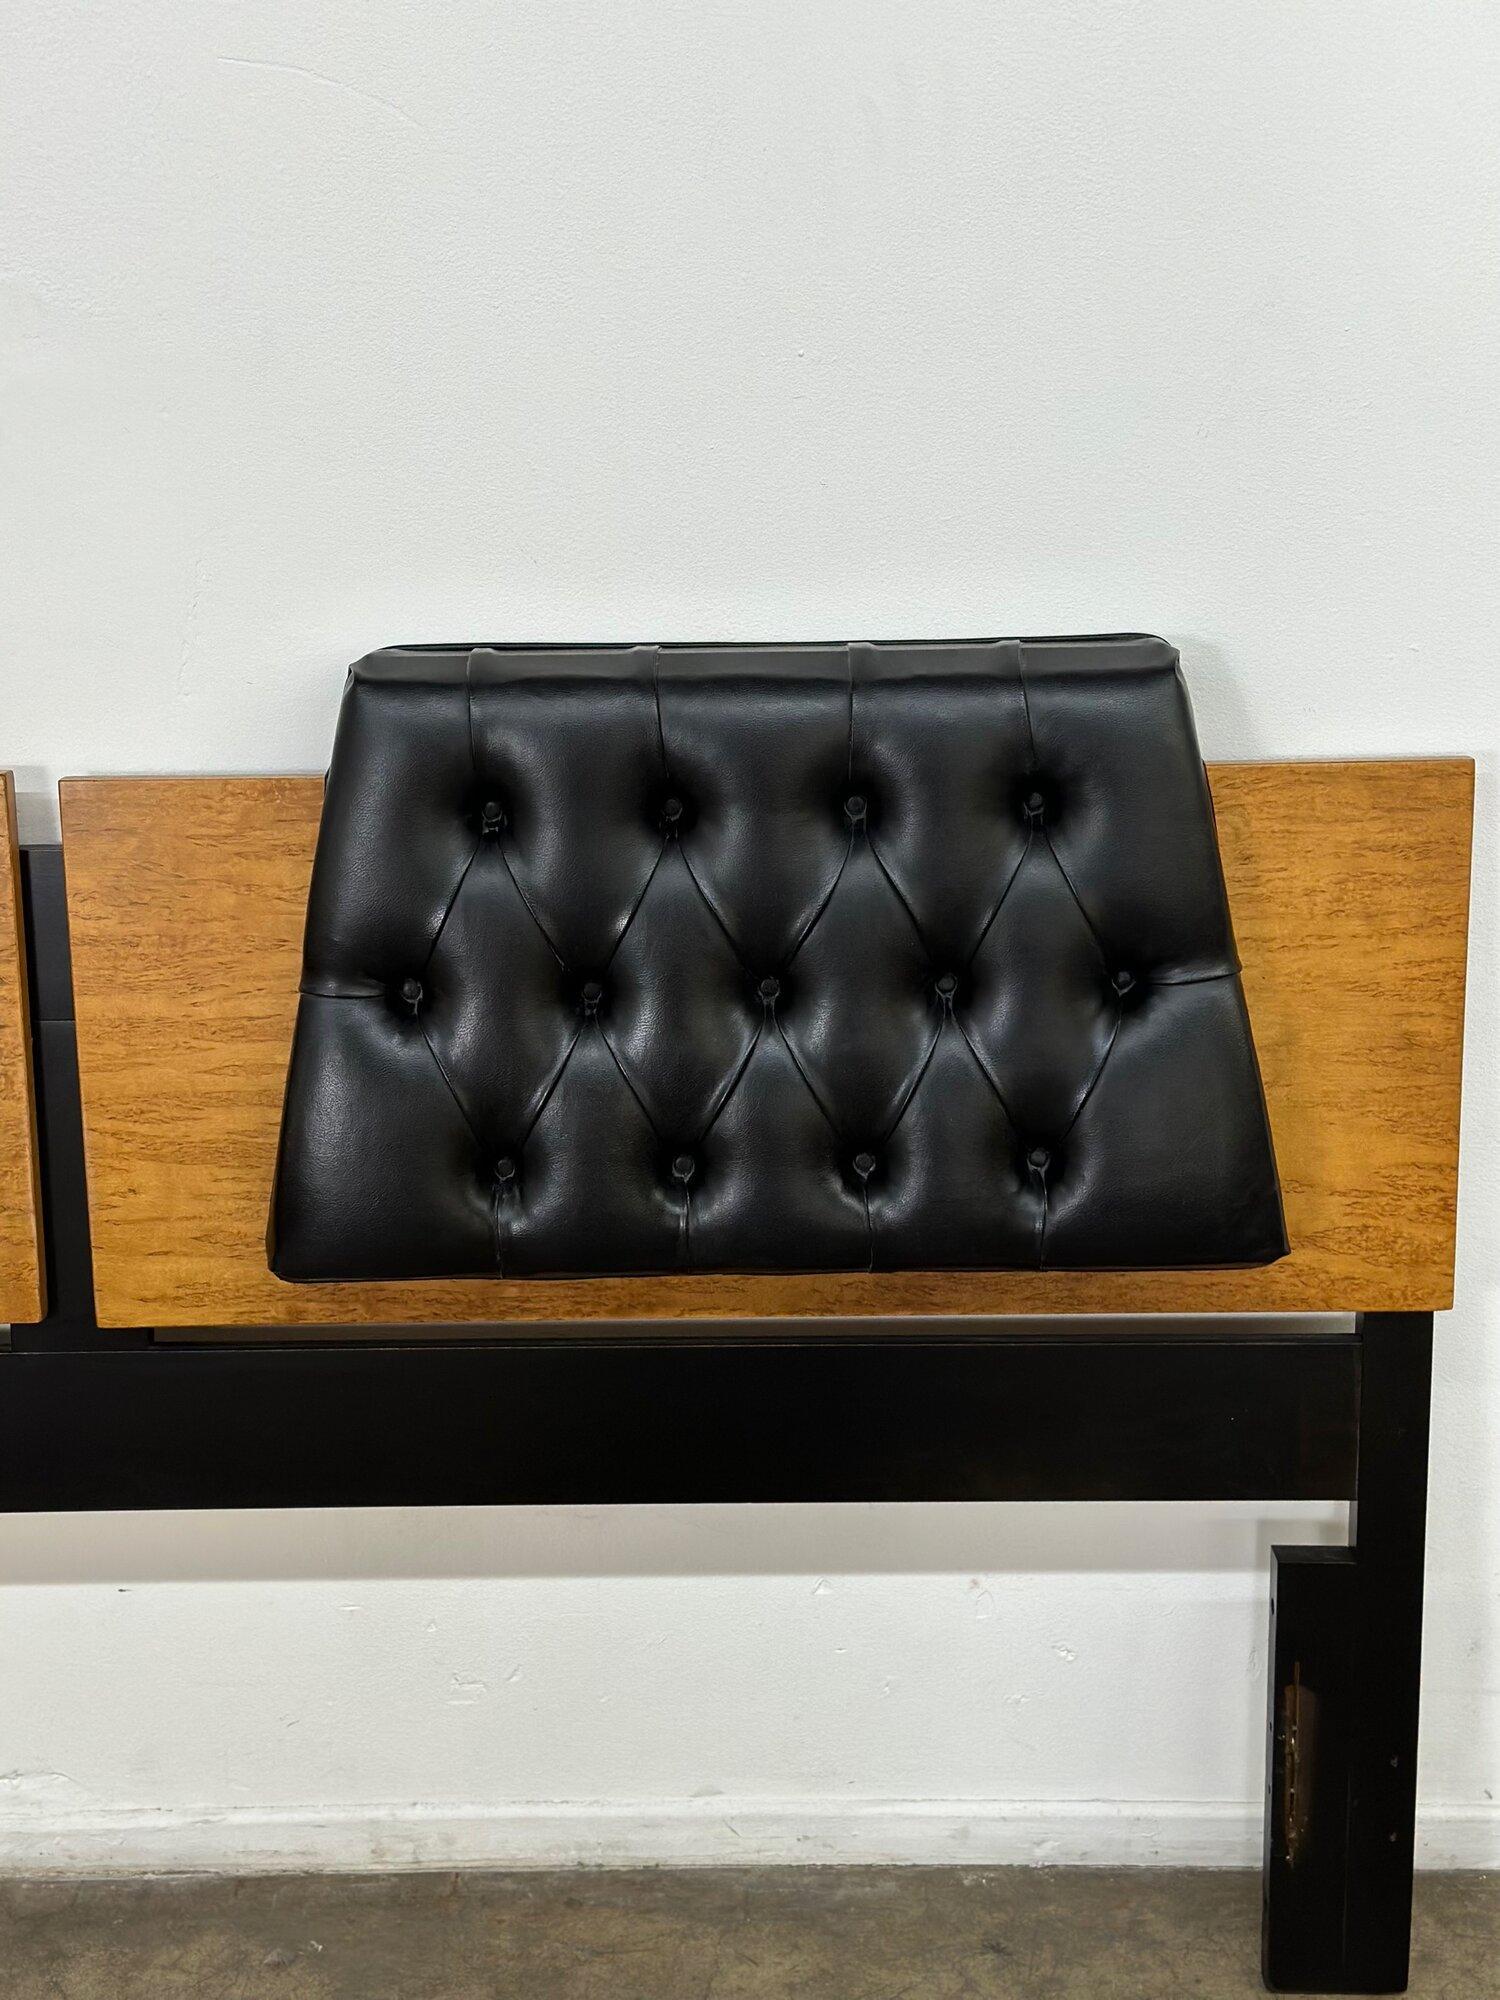 W80.5 H42 D4

Headboard in black vinyl  , a black ebony base and nice subtle burlwood. Item is In excellent vintage condition with no major areas of wear. Listing is for the headboard alone and does not include platform.